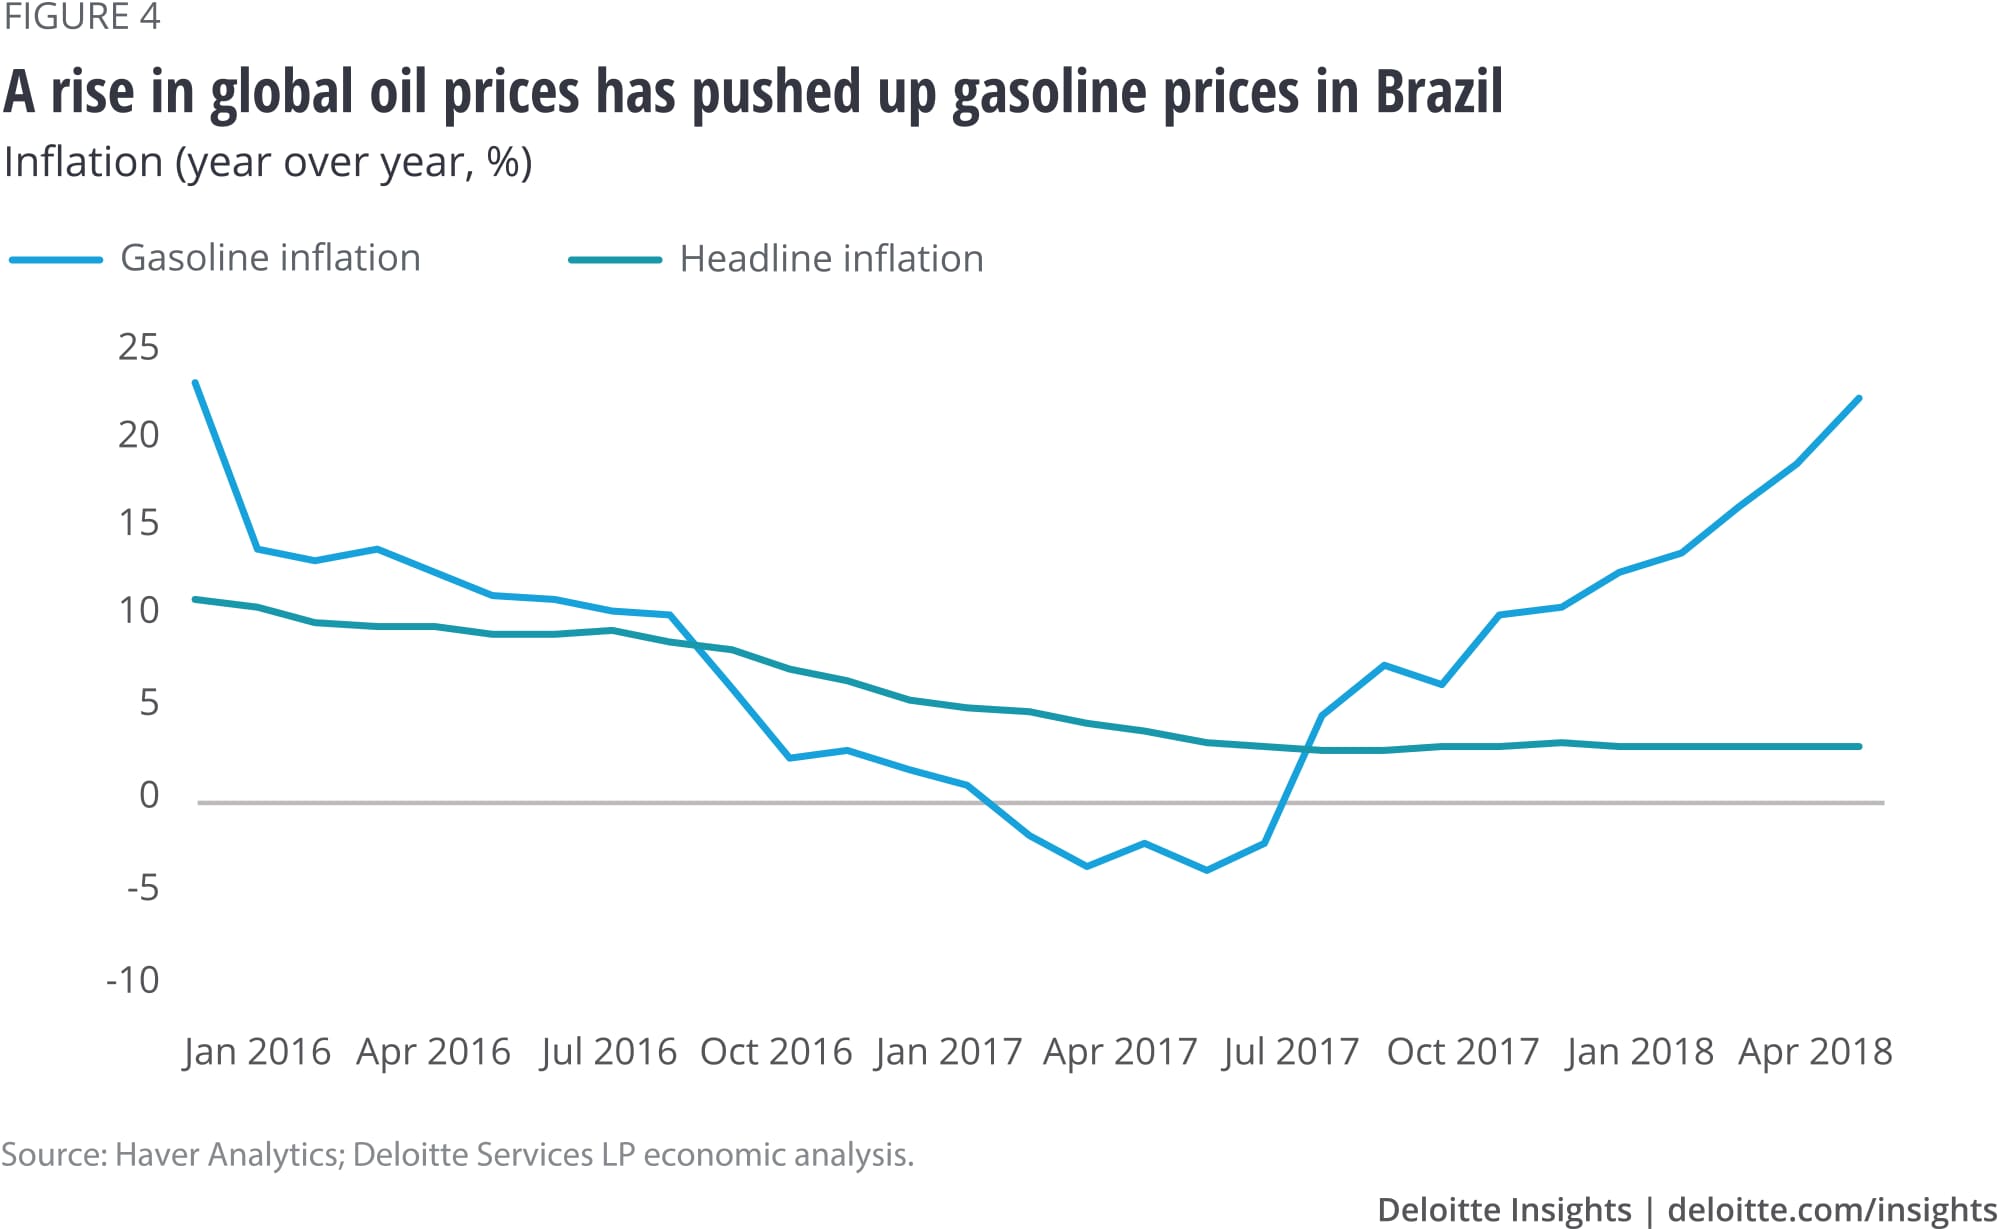 A rise in global oil prices has pushed up gasoline prices in Brazil